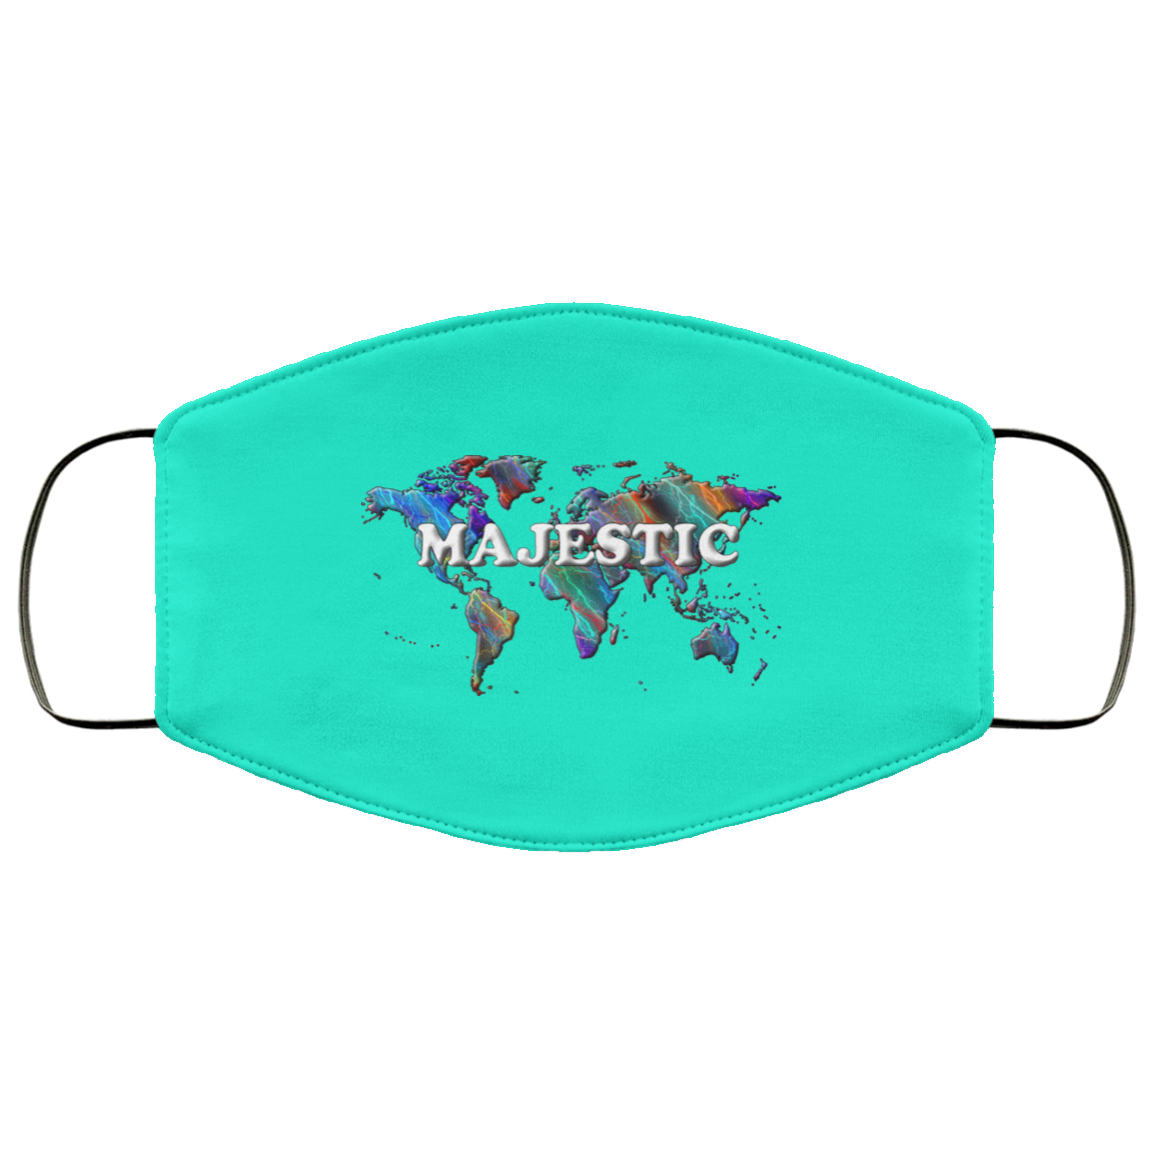 Majestic 2 Layer Protective Mask